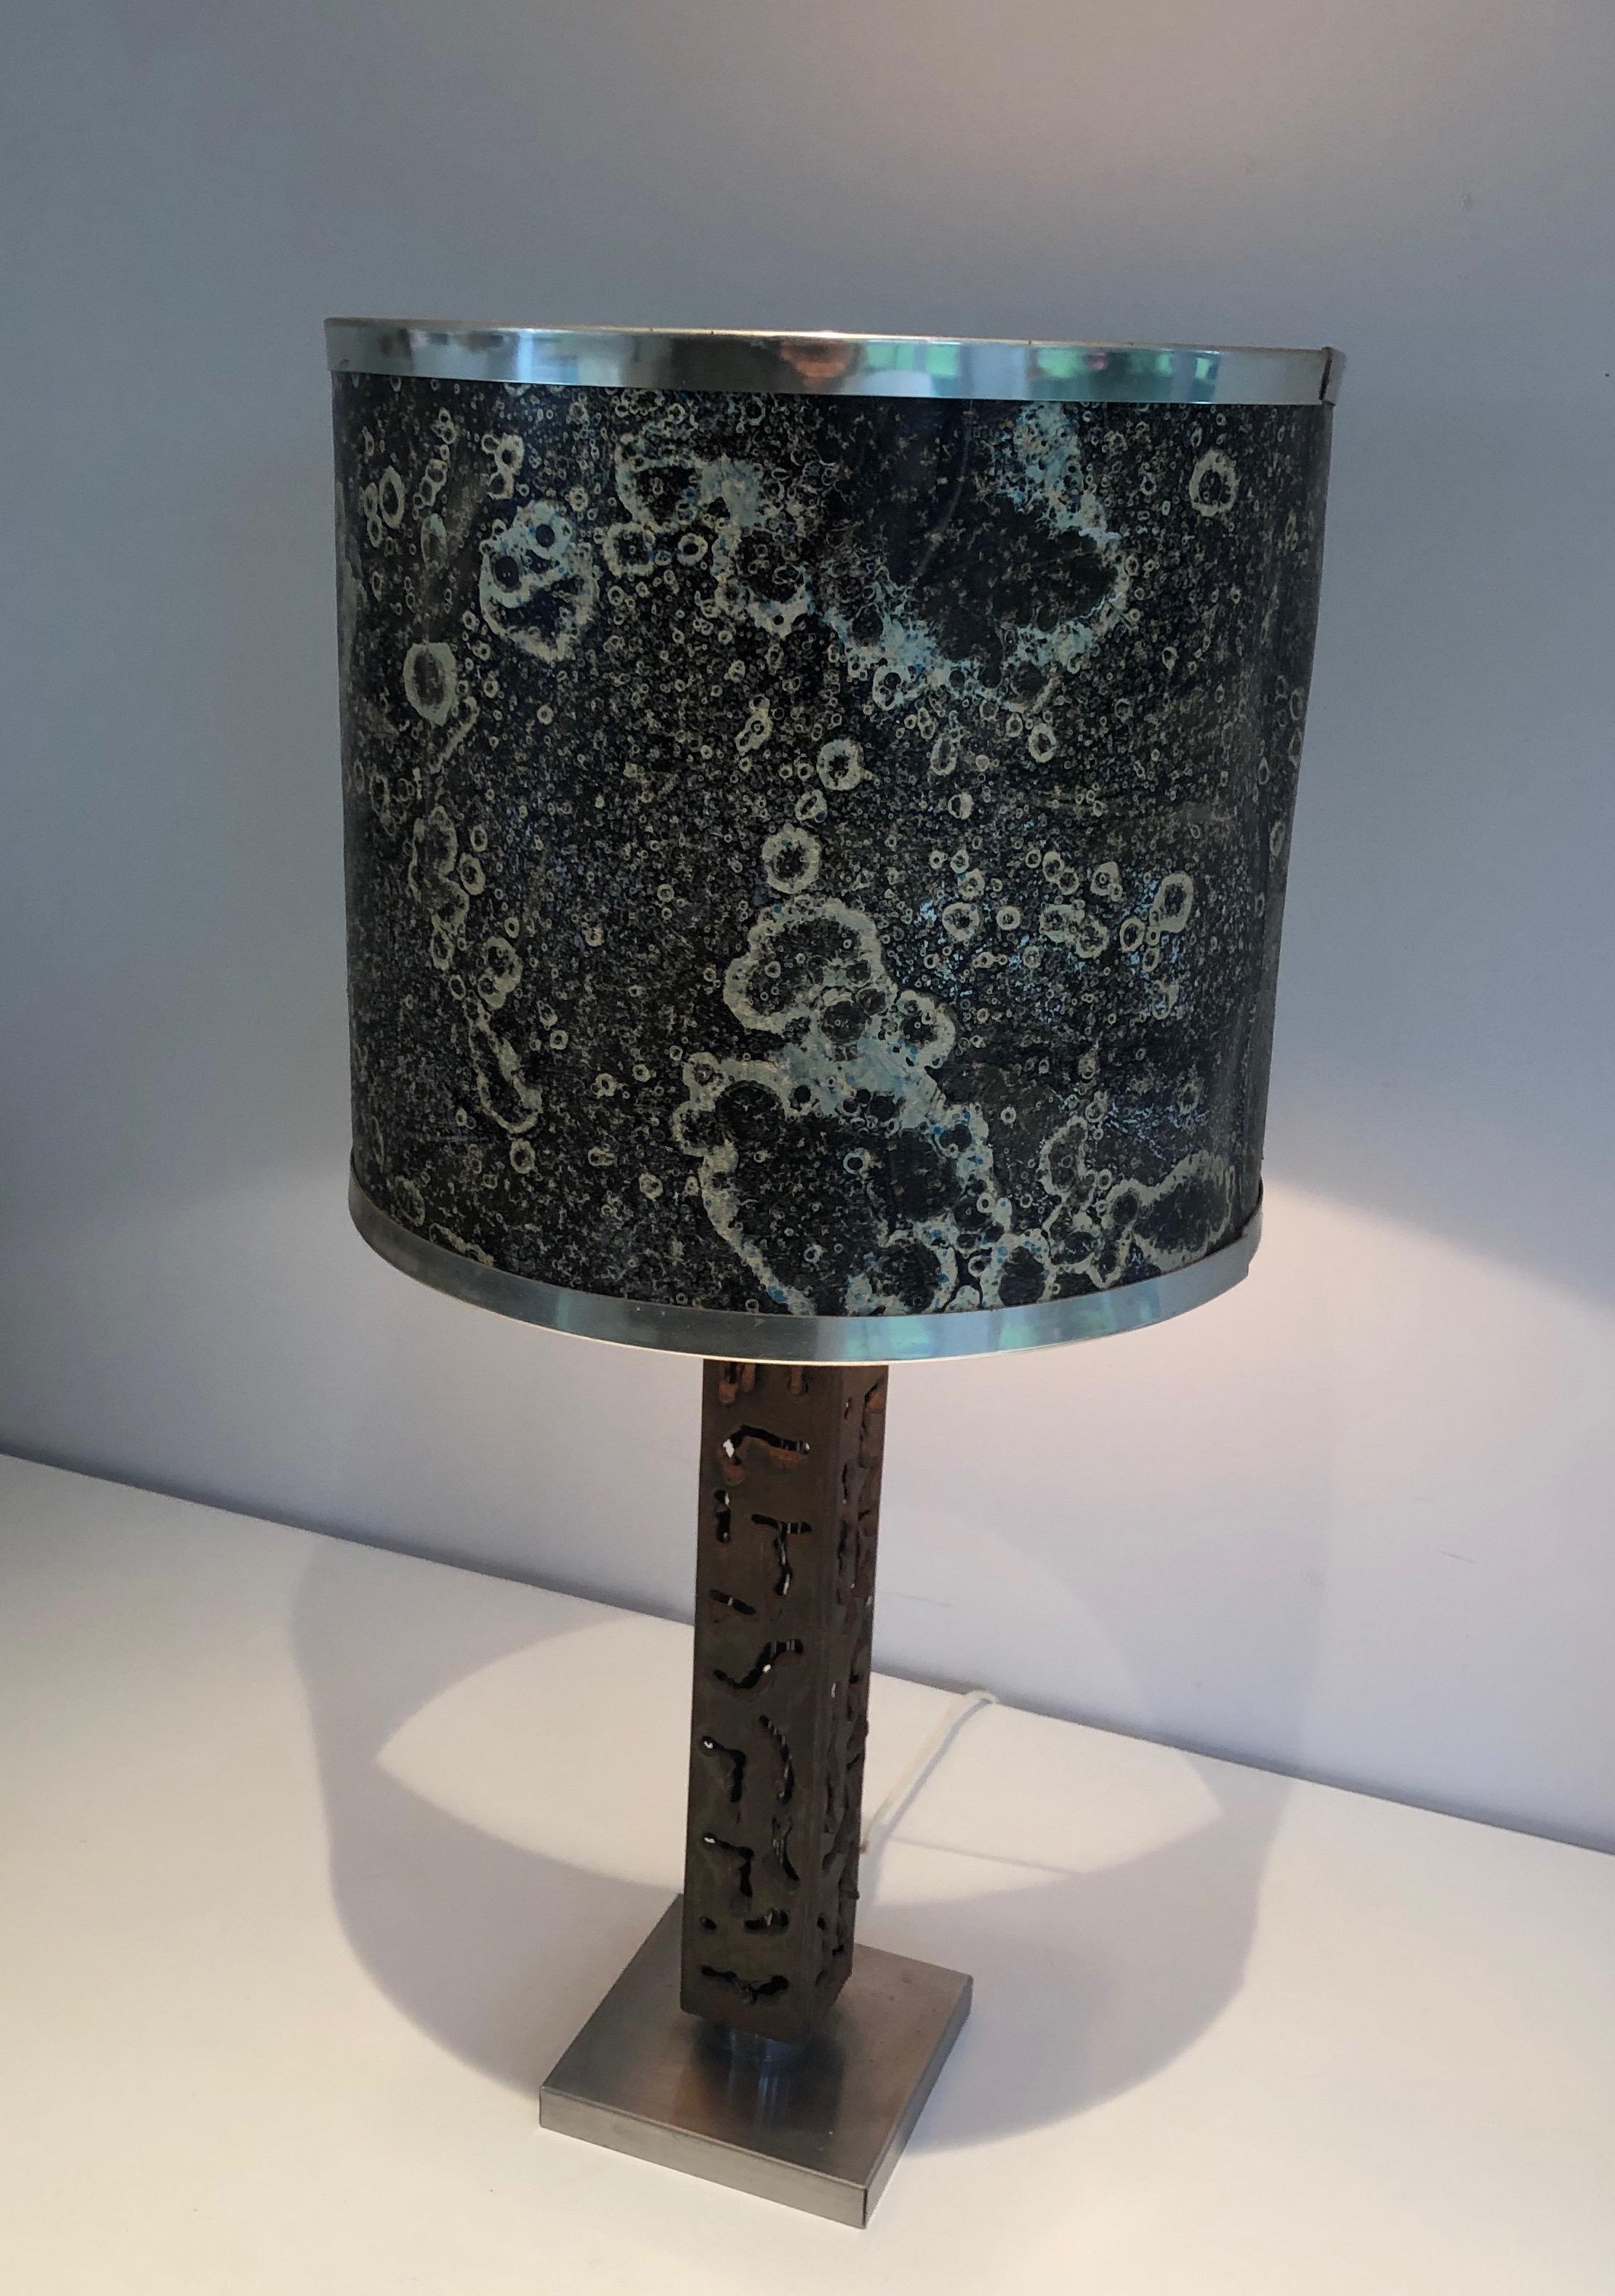 Worked Steel Design Table Lamp, French Work, circa 1970 In Good Condition For Sale In Marcq-en-Barœul, Hauts-de-France